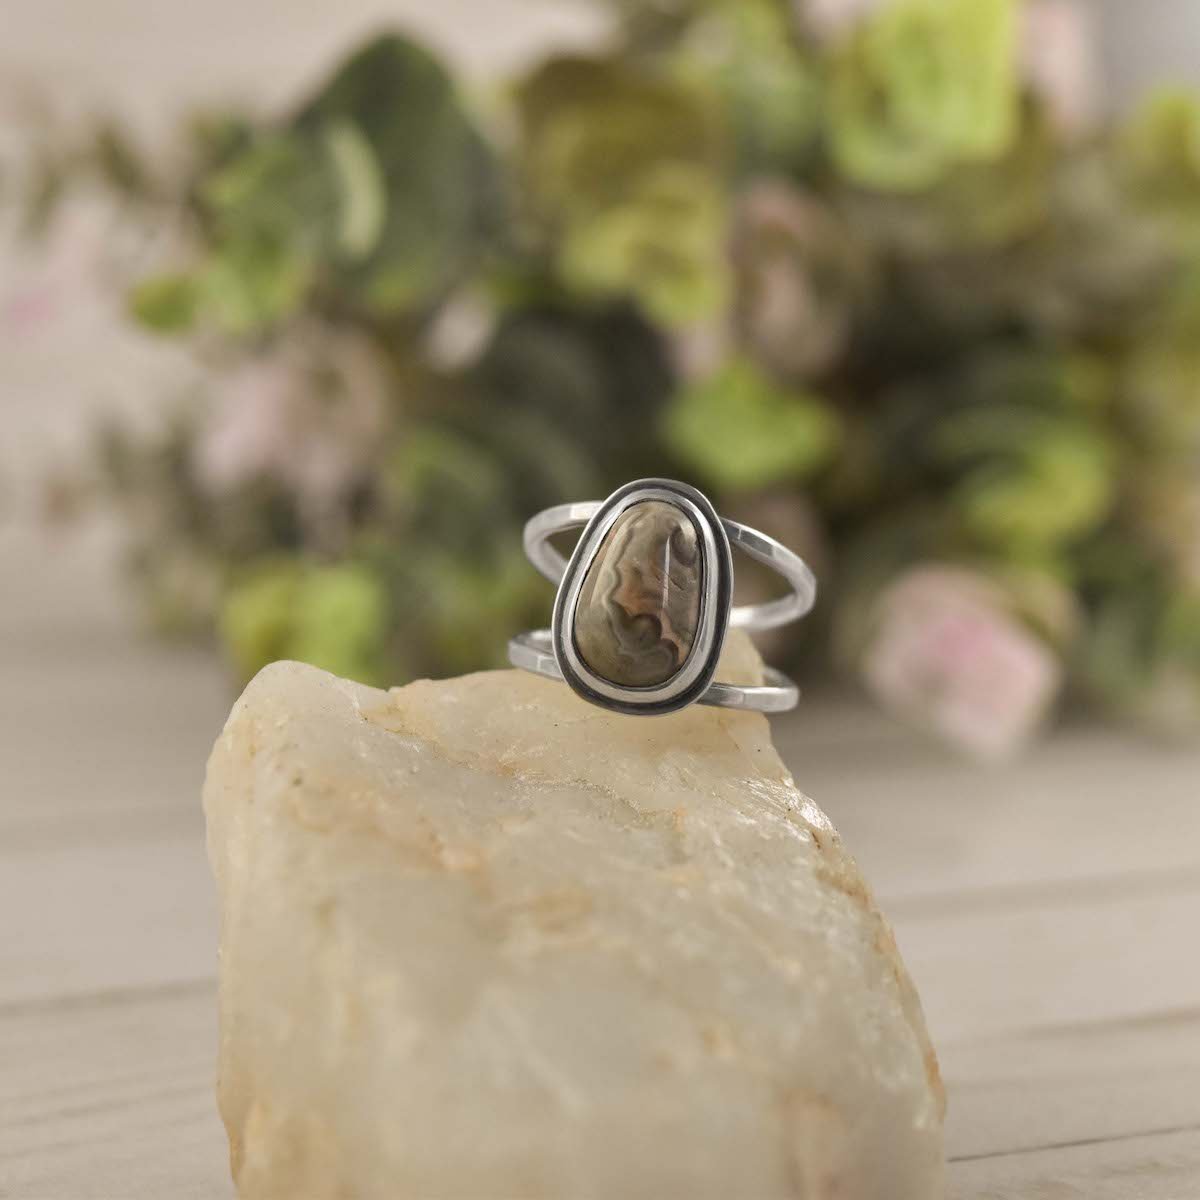 Lake Superior Agate Ring - Choose Your Own Stone